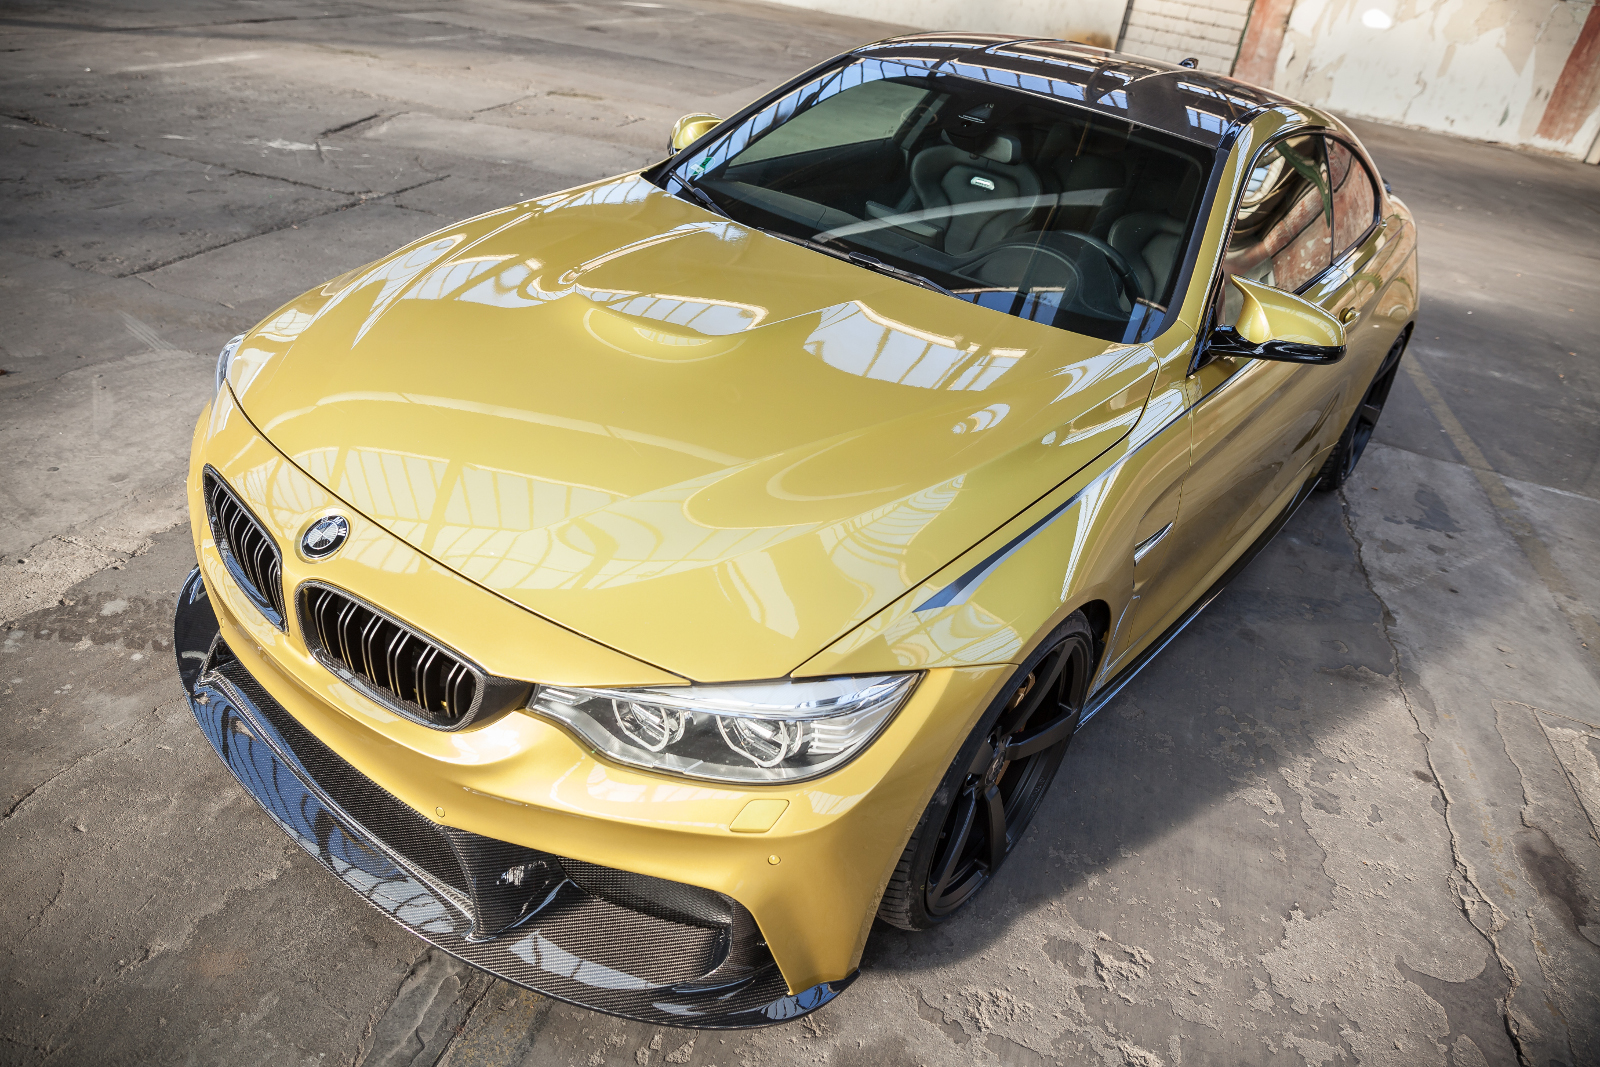 F82 BMW M4 Coupe by Carbonfiber Dynamics Unveiled at 2015 Essen Motor Show